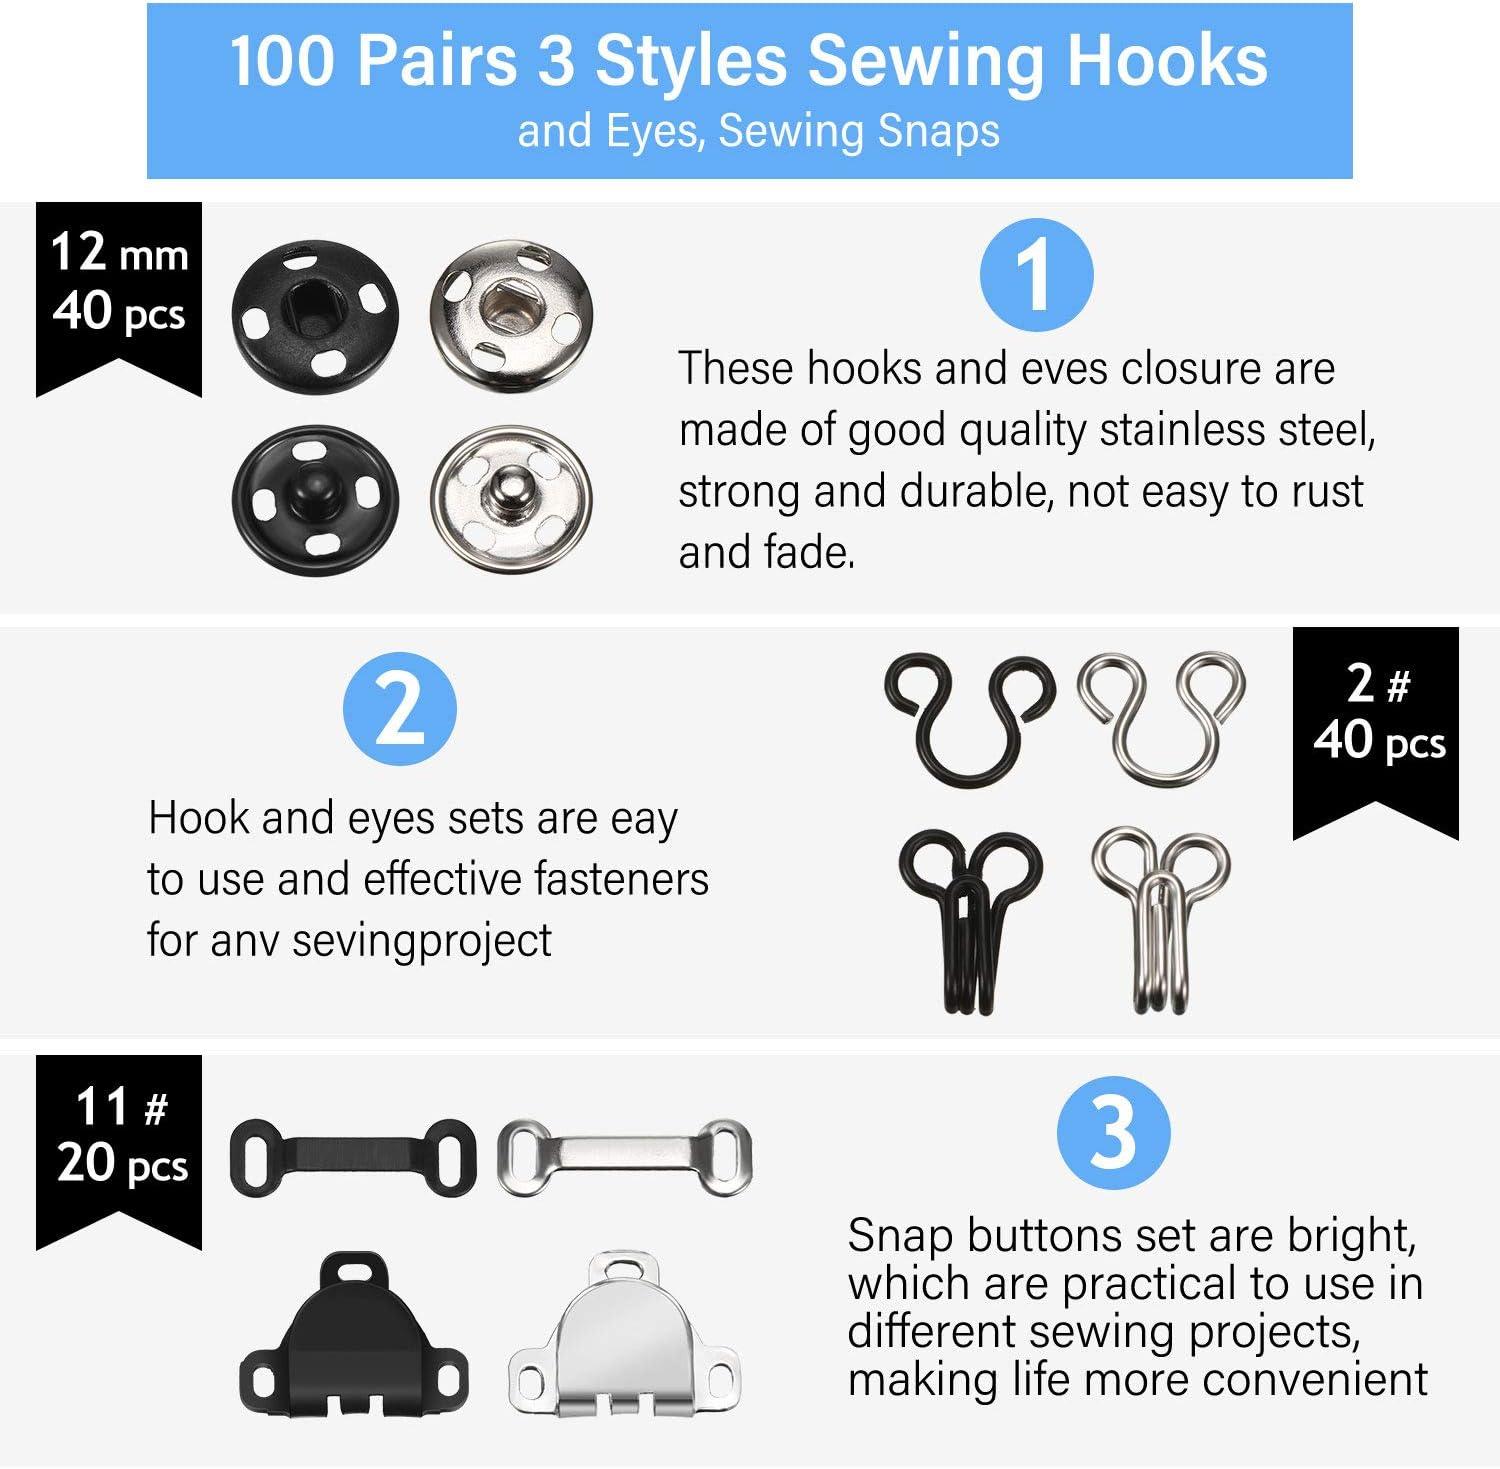 100 Pairs 3 Styles Skirt Sewing Hooks and Eyes Sewing Snaps Kit